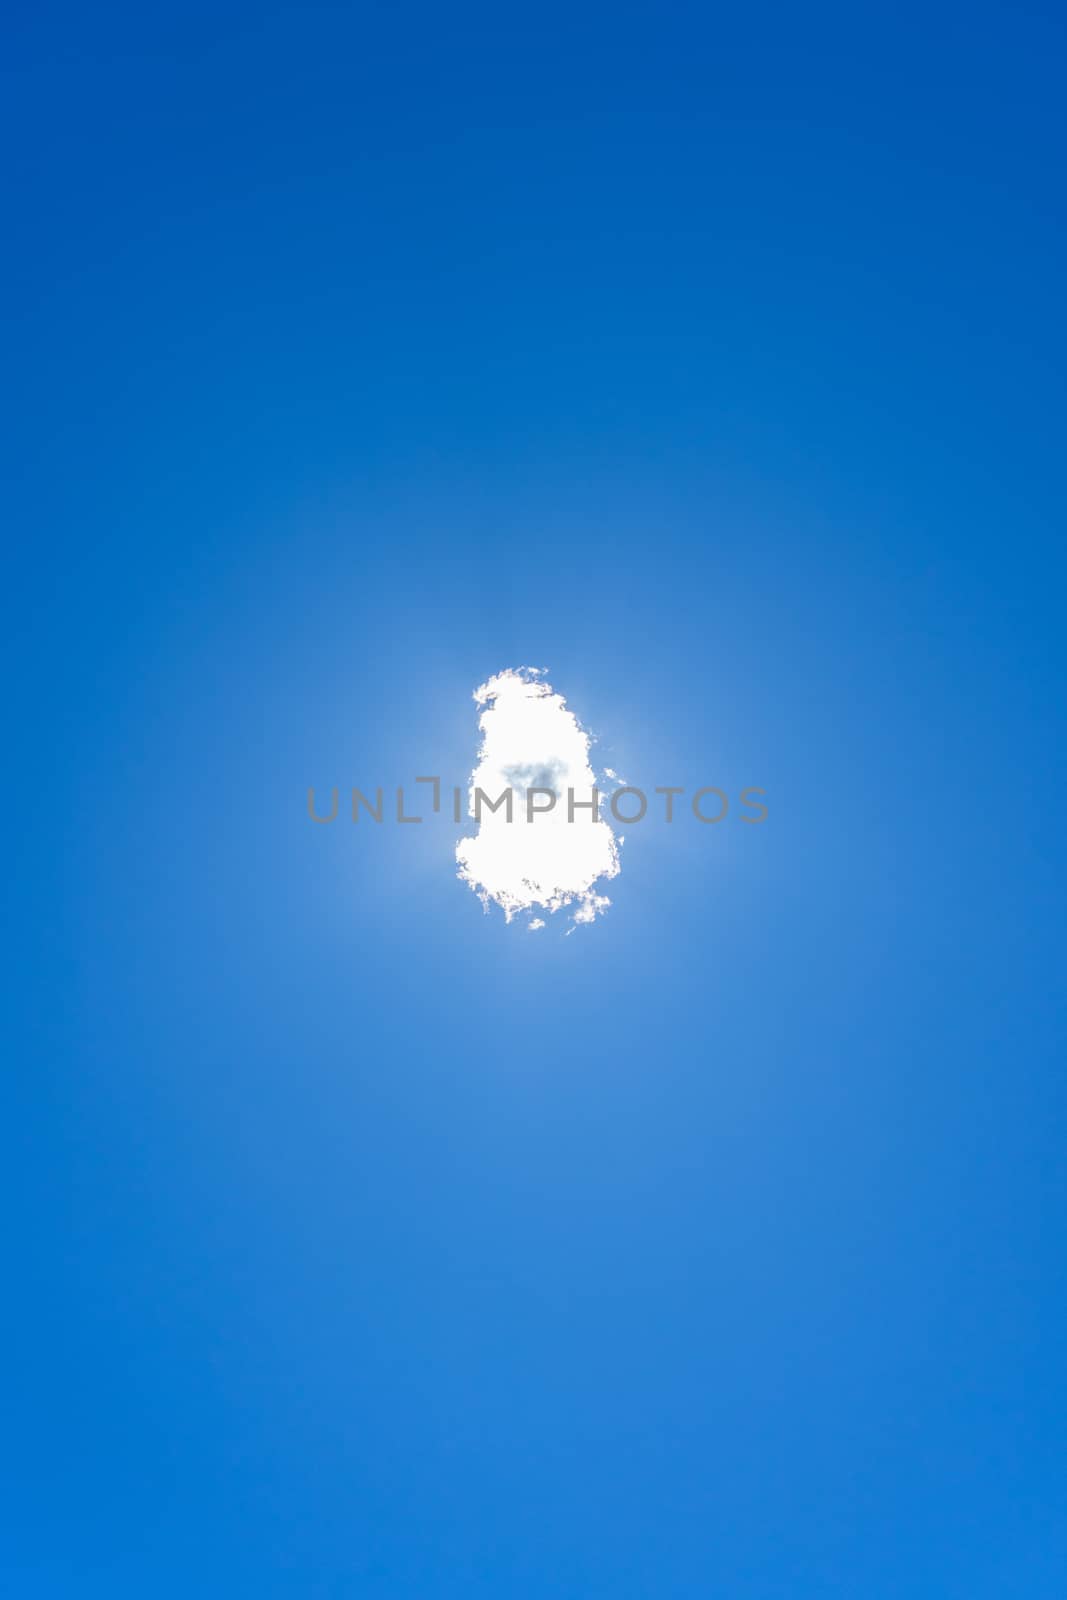 Cloud directly covering the sun in clean blue sky by Dumblinfilms